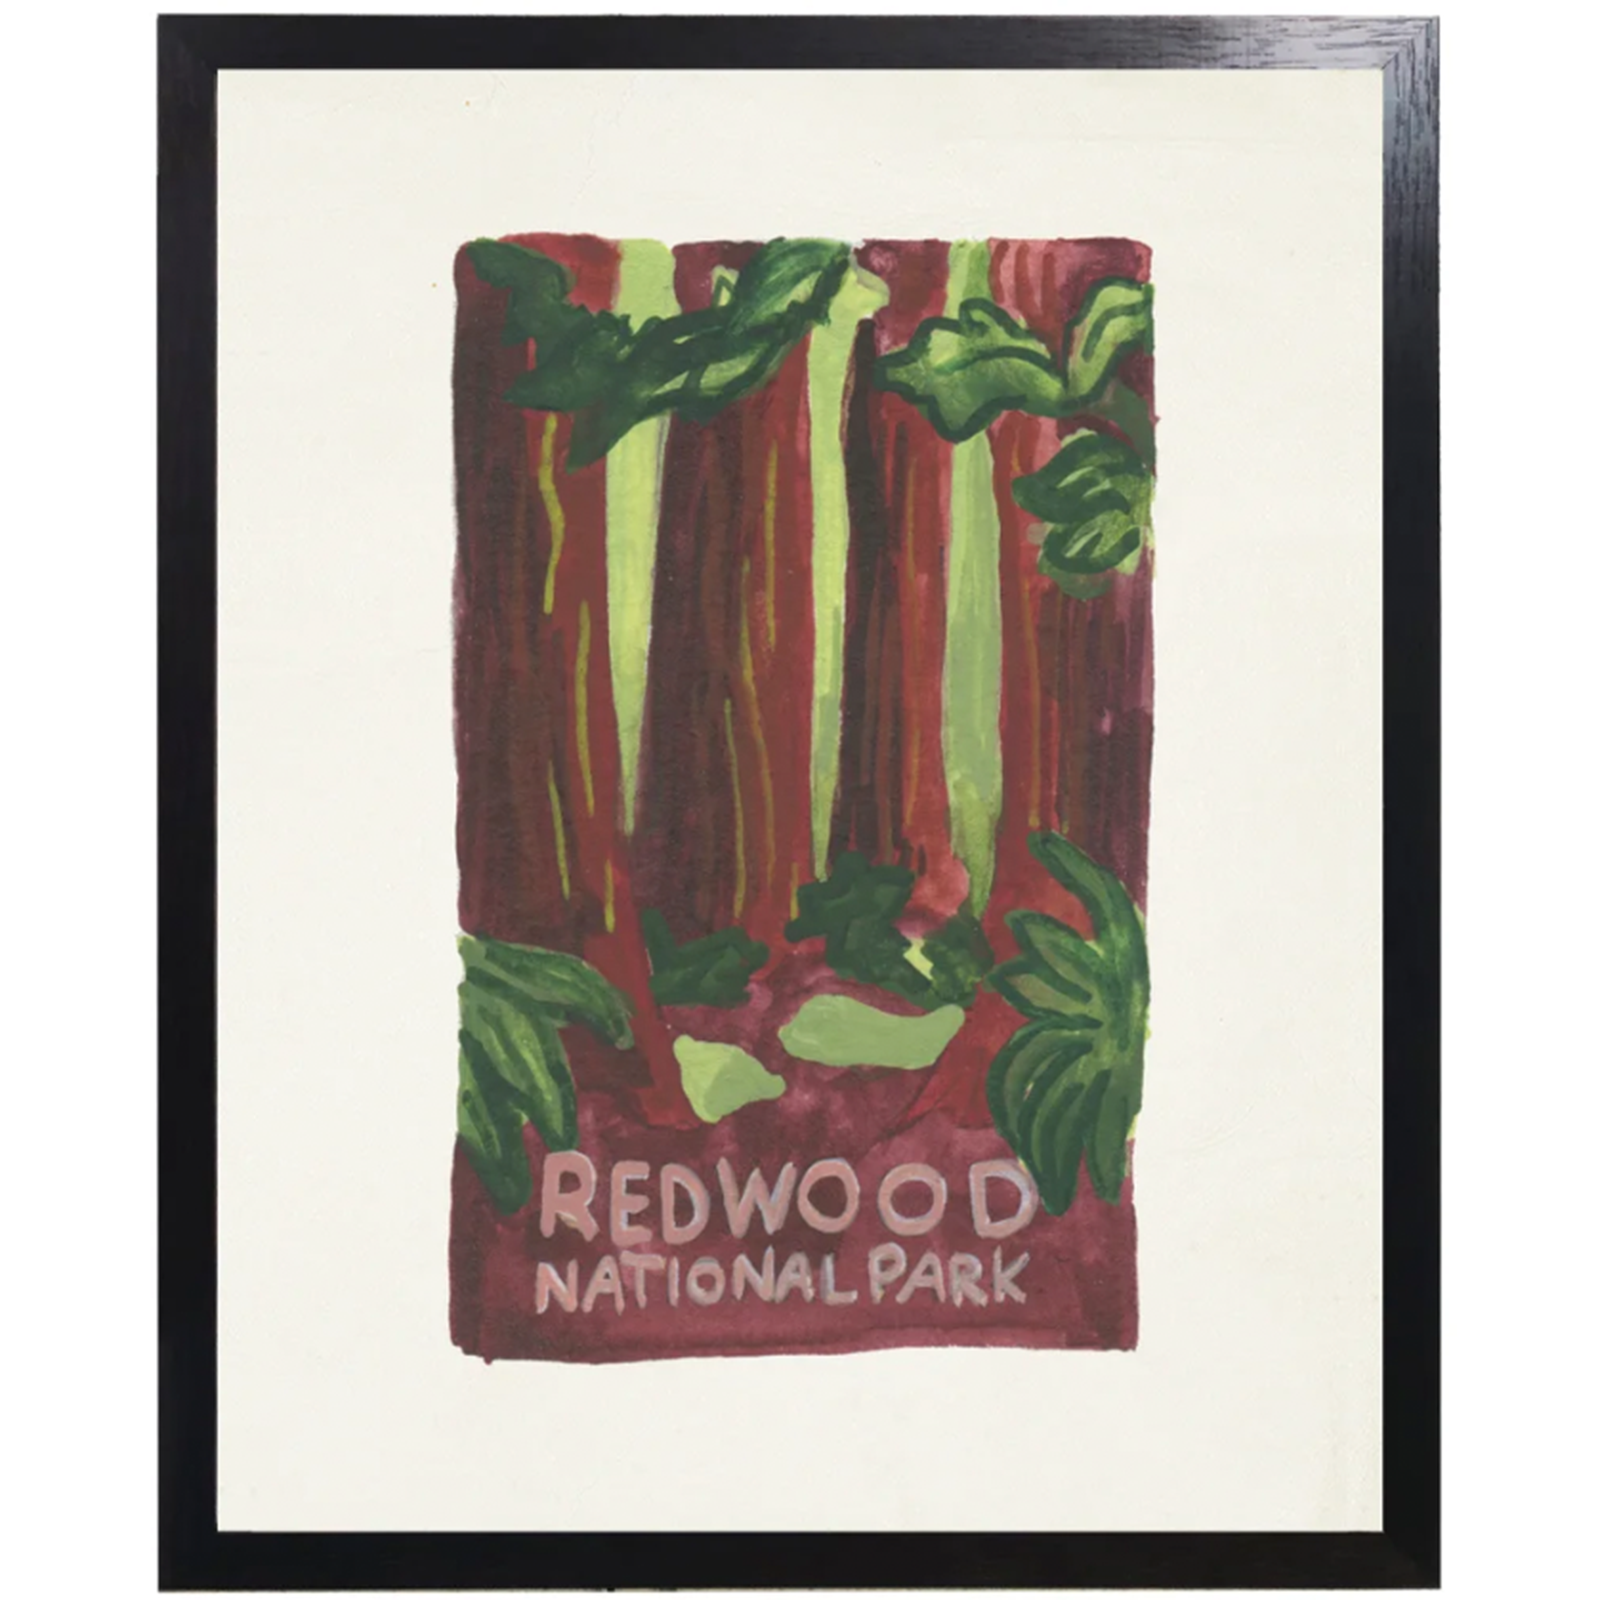 Red Wood